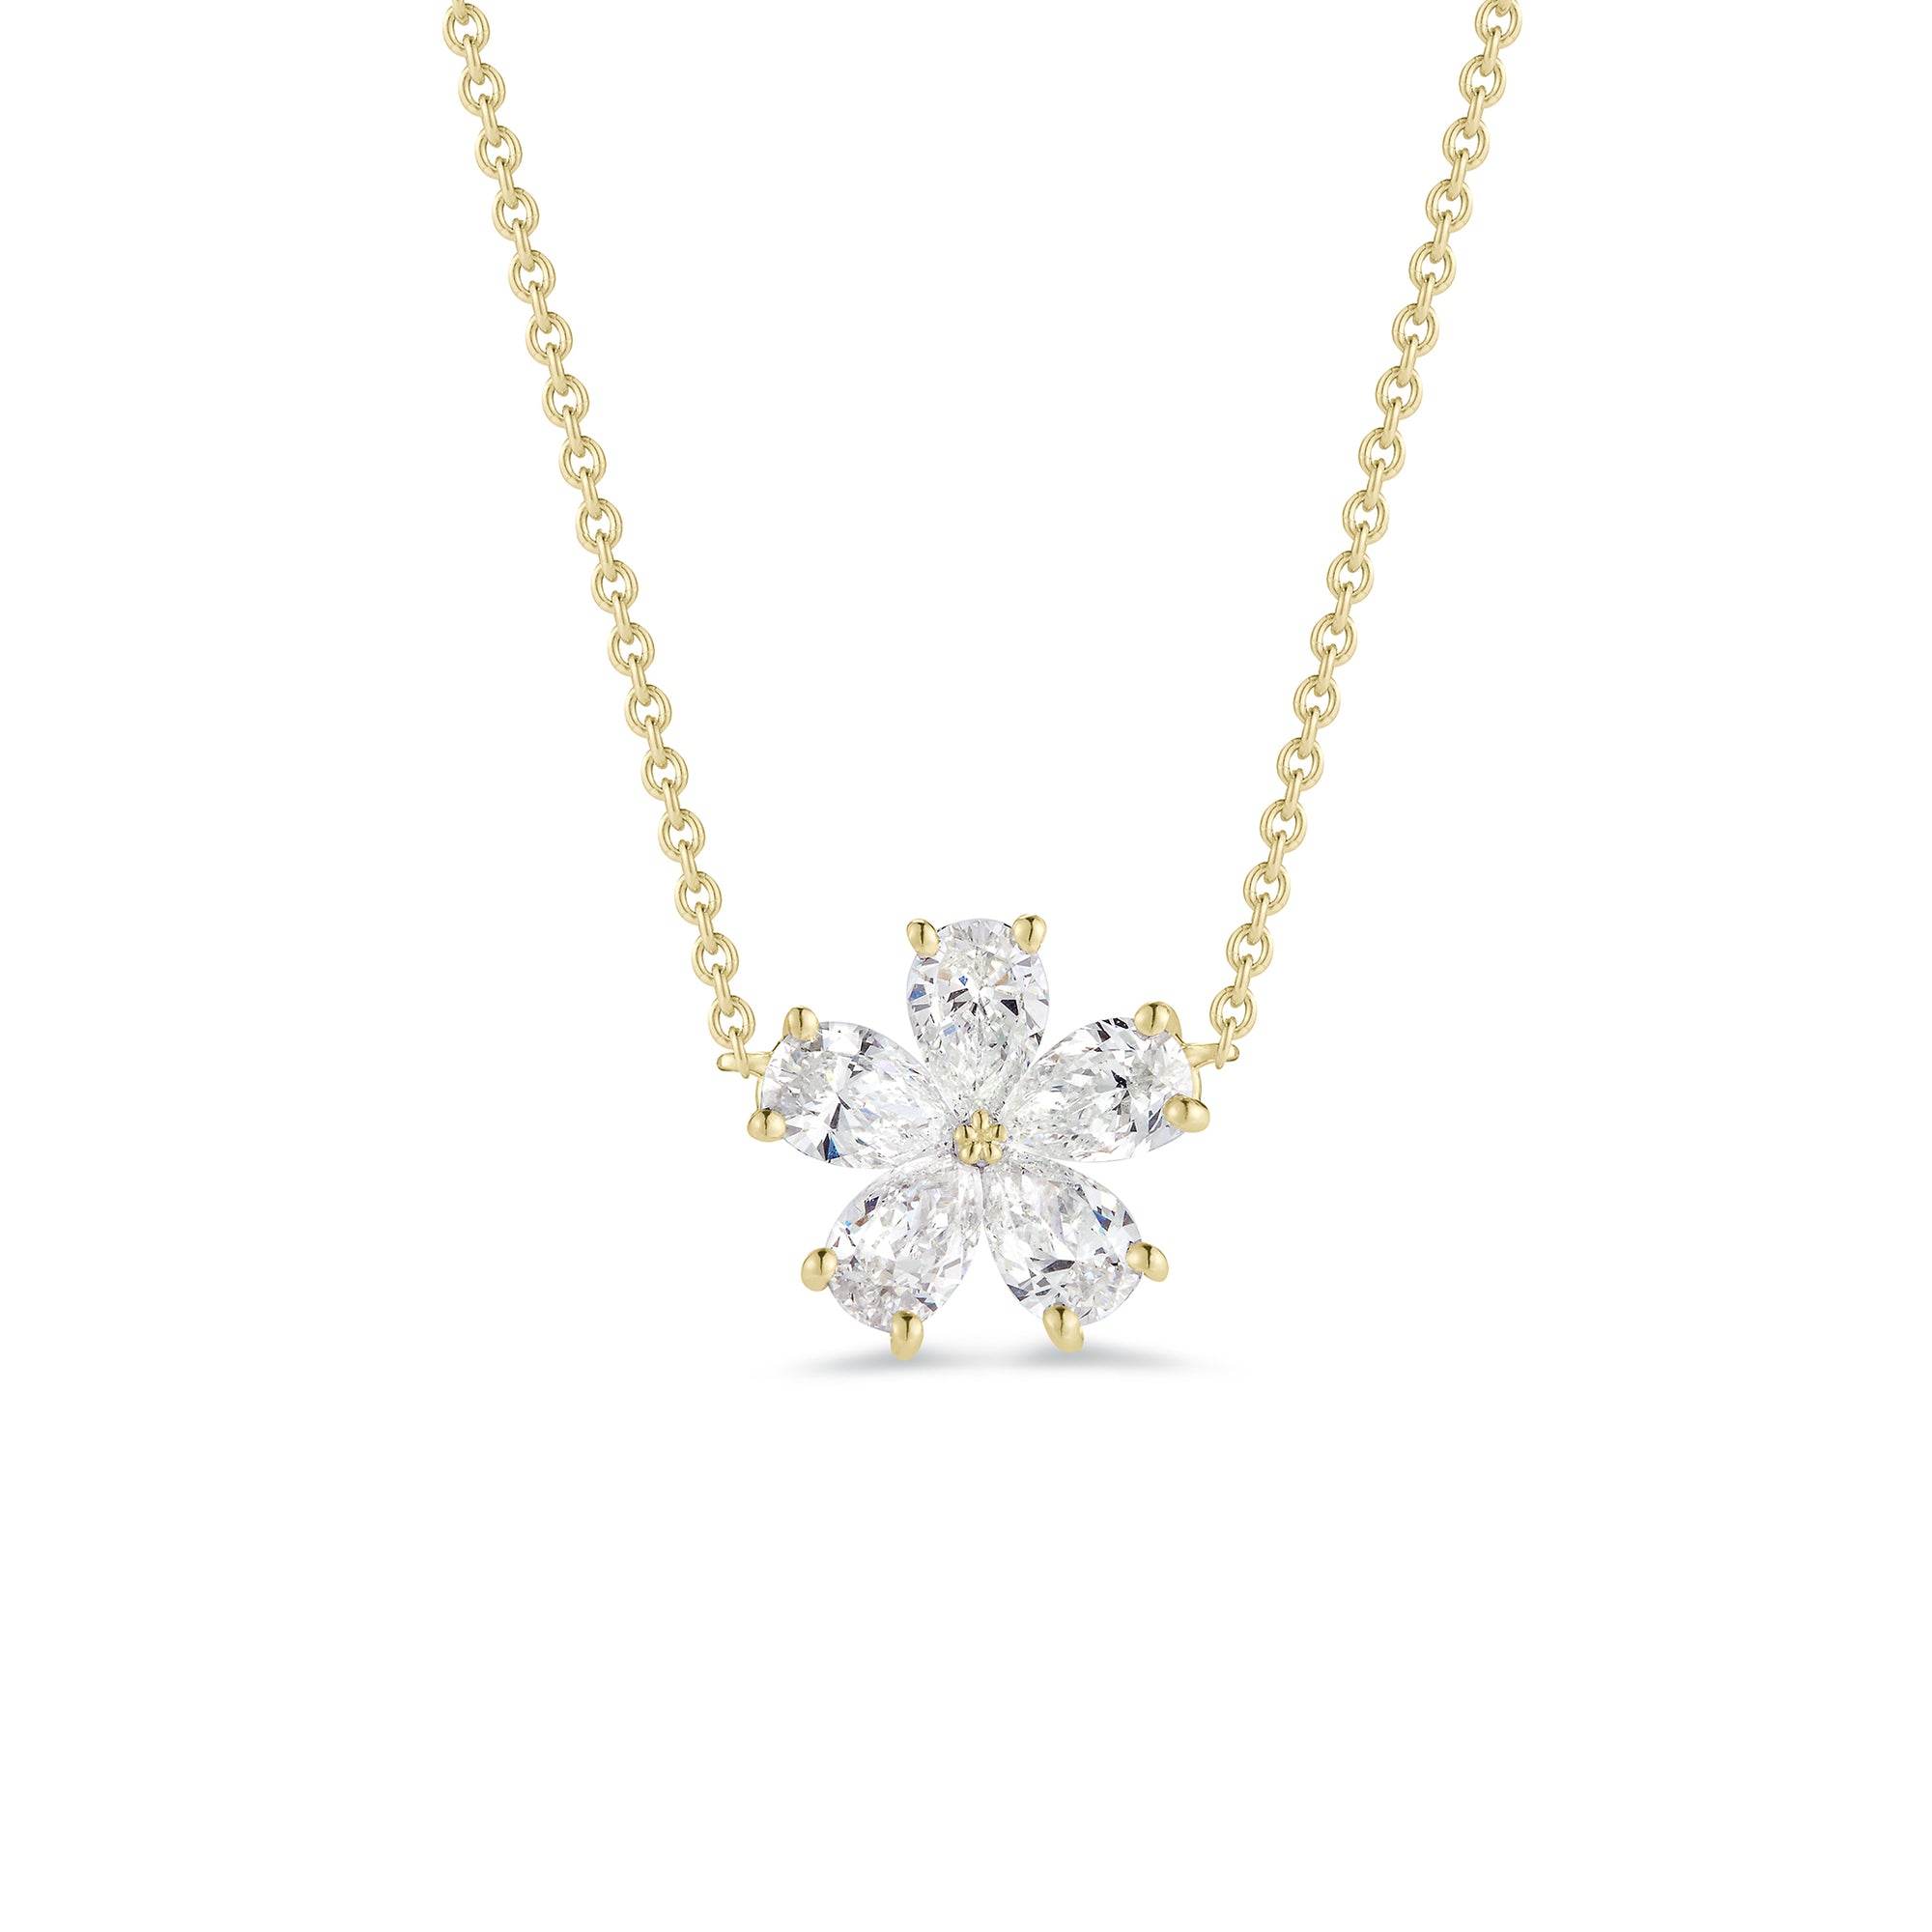 Prong-set Diamond Flower Necklace  18k gold, 3.51 grams, 5 pear-shaped prong-set brilliant diamonds .63 carats, 16-18”  Size width 9 millimeters. Available in 16" or 18" lengths.